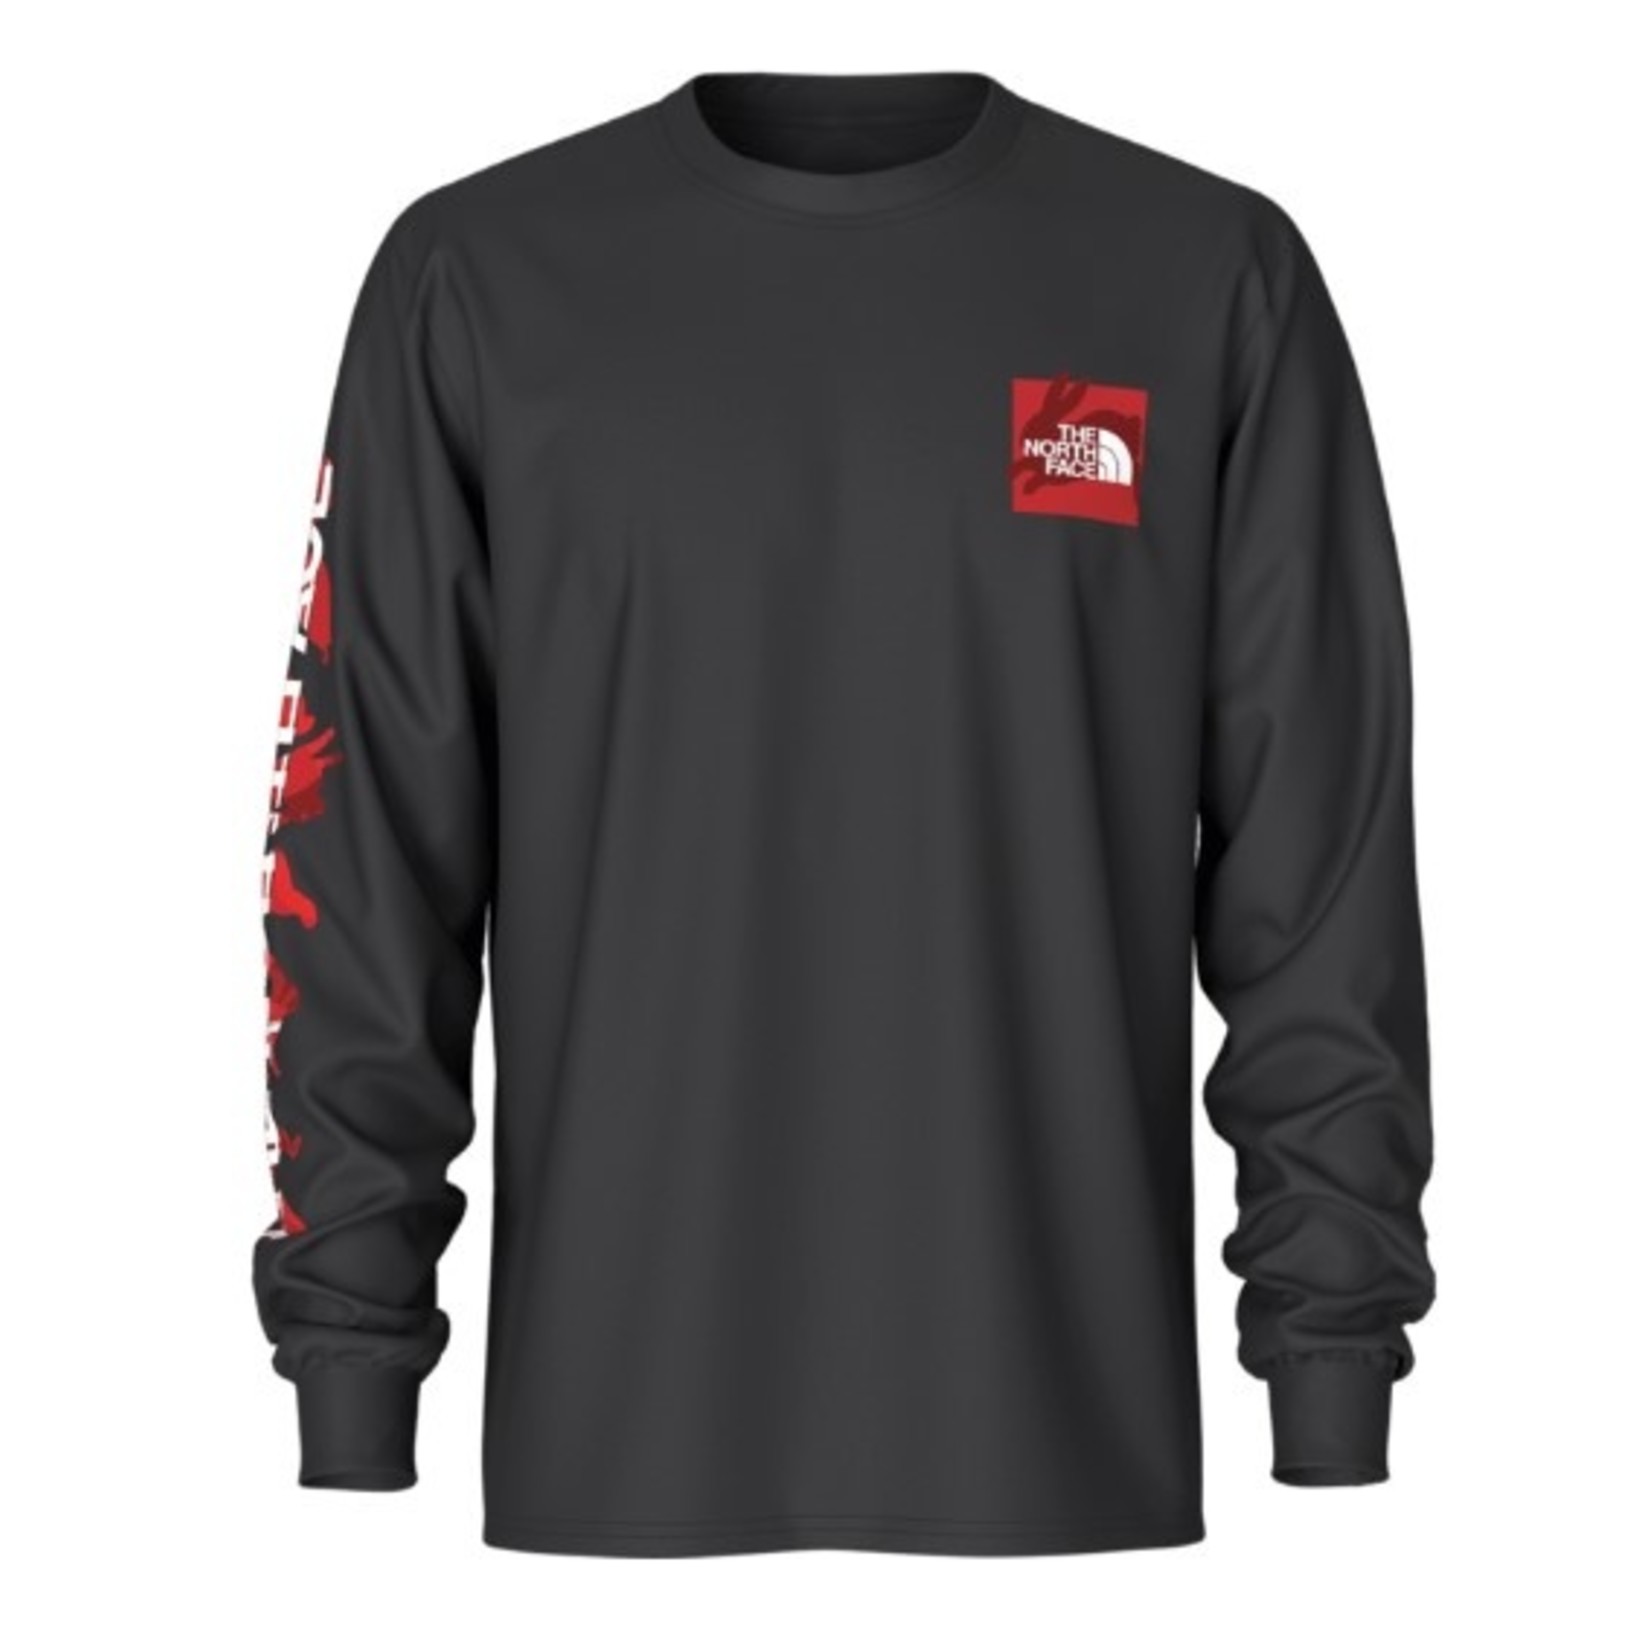 THE NORTH FACE Men's L/S Lunar New Year Tee